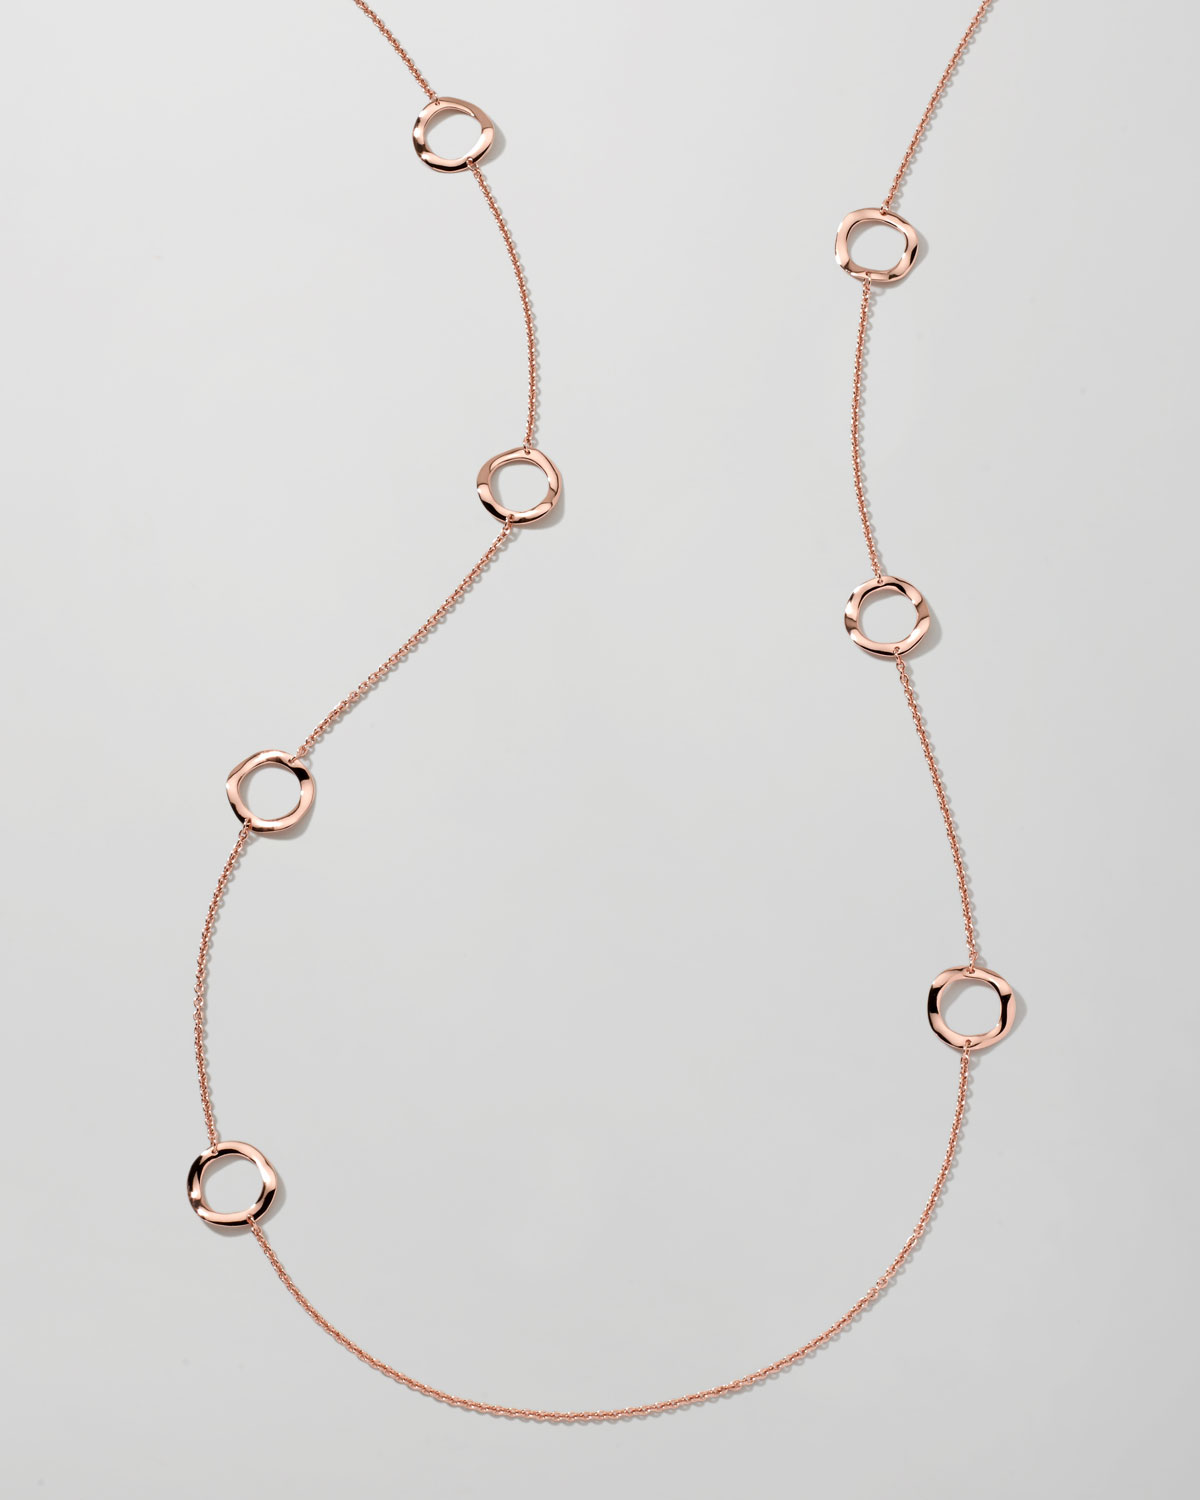 Lyst - Ippolita Rose Wavy Circle Station Necklace in Pink